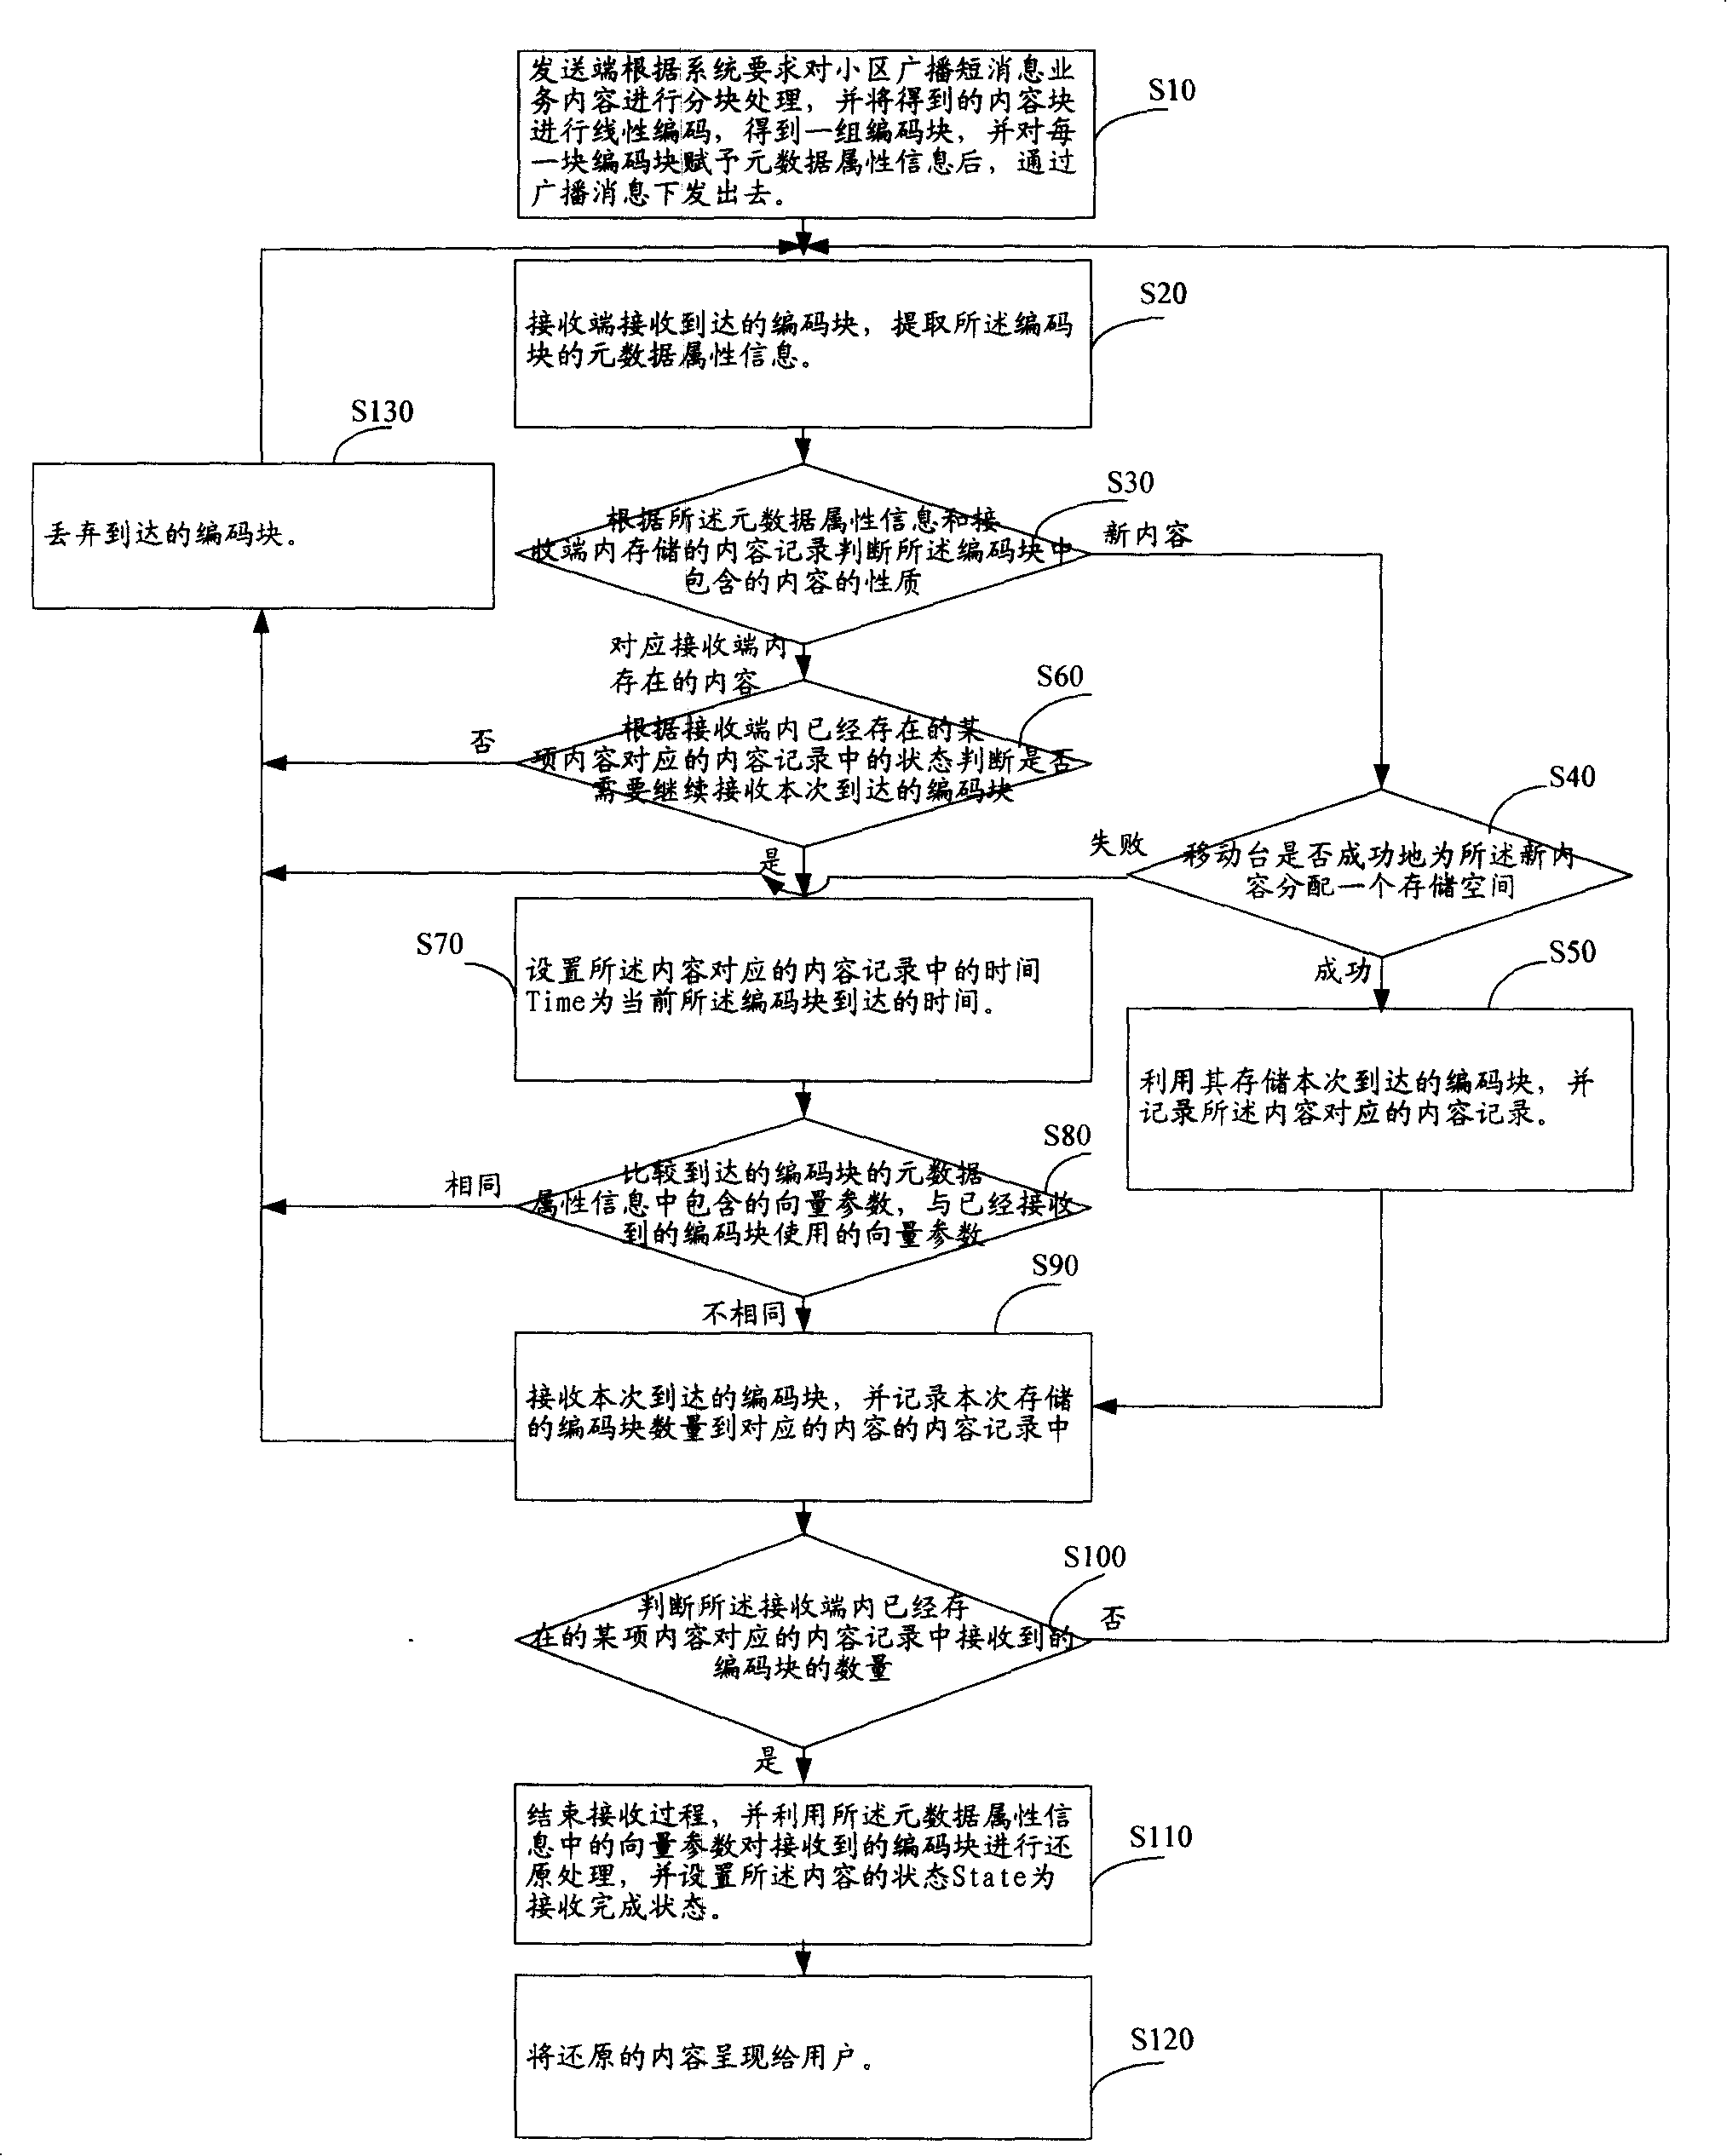 Method and system for processing high-capacity cell broadcasting service